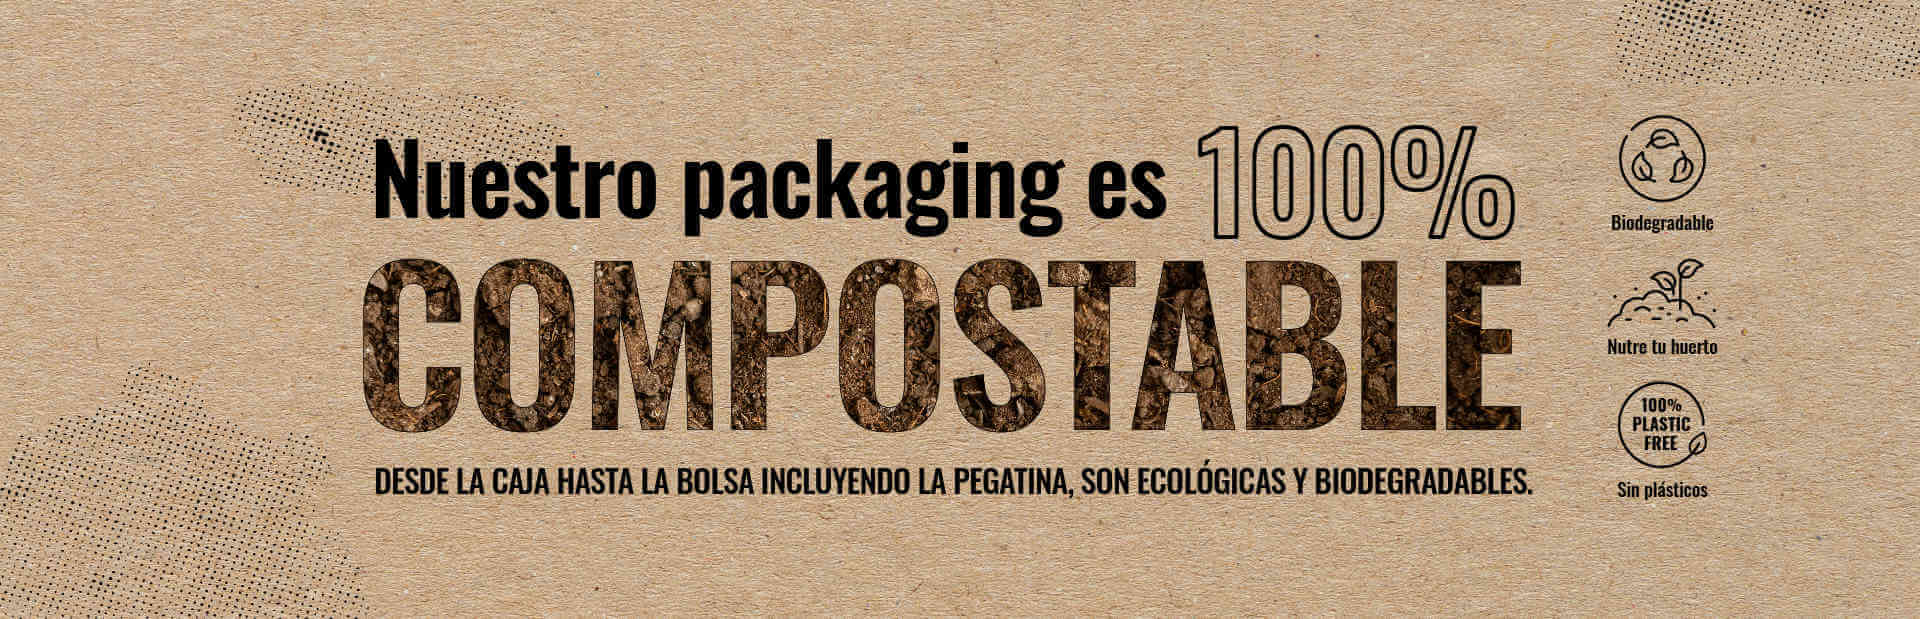 packing compostable 4colectors